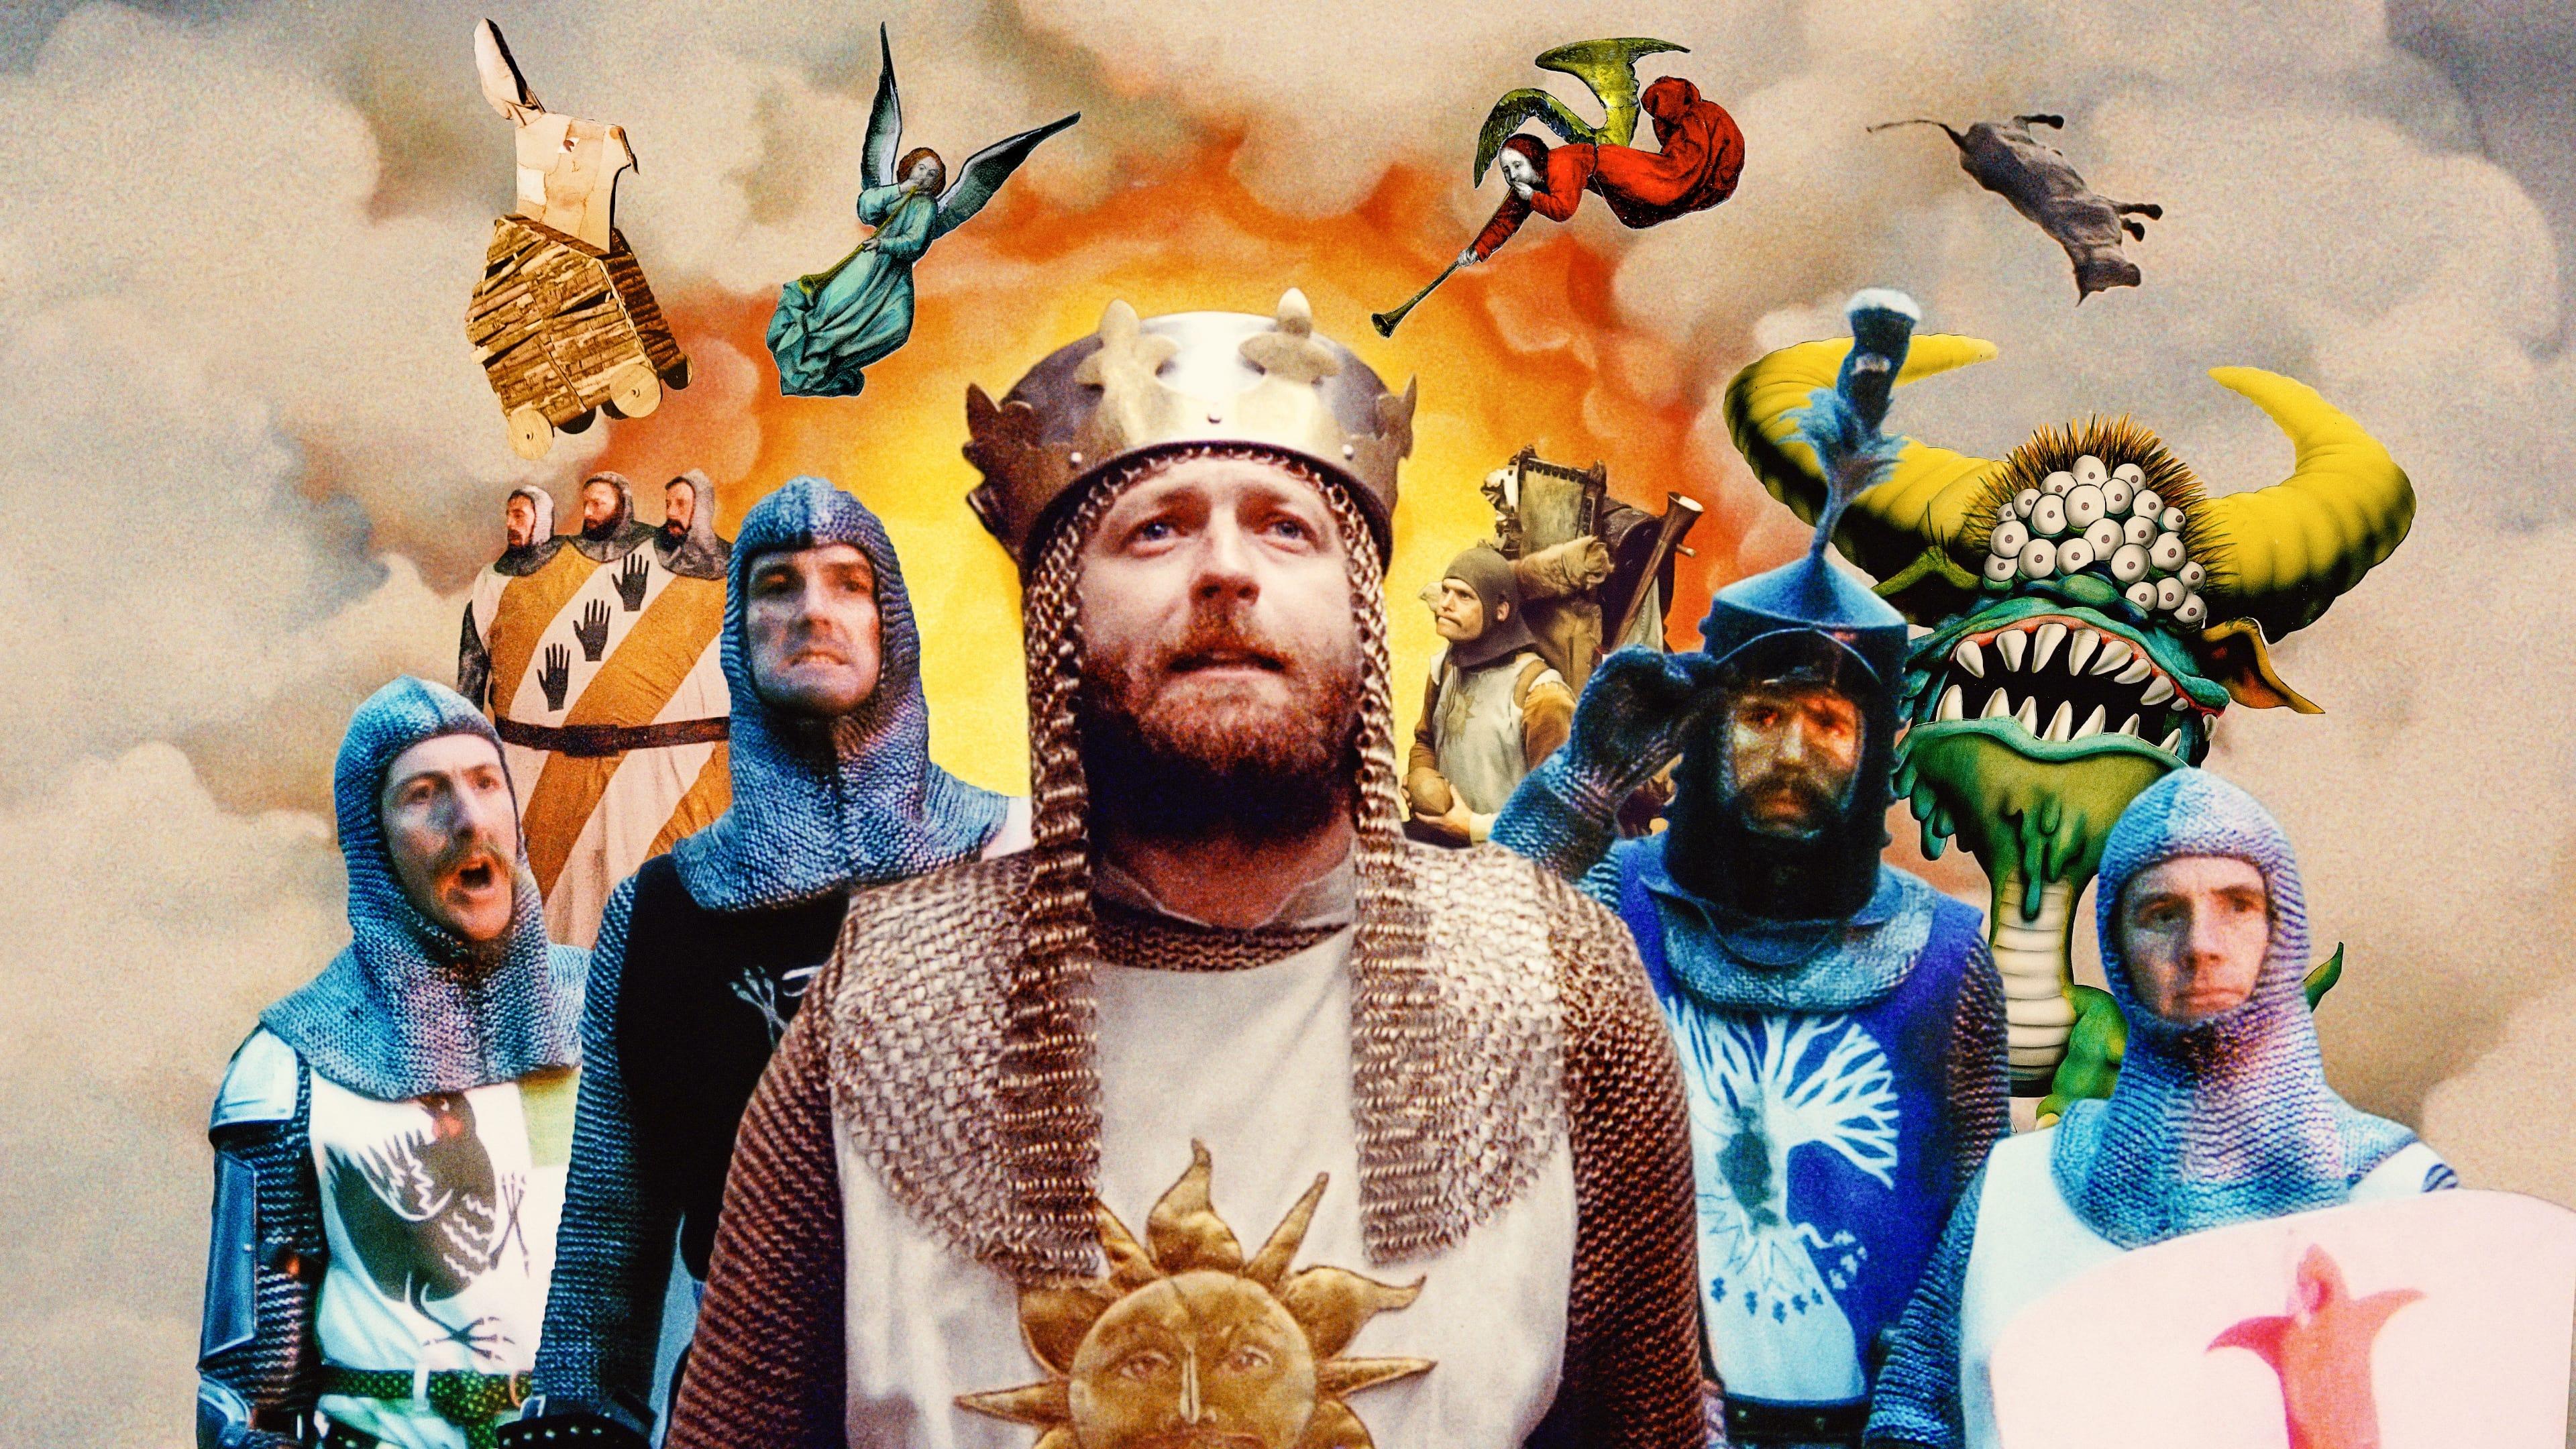 Monty Python and the Holy Grail backdrop